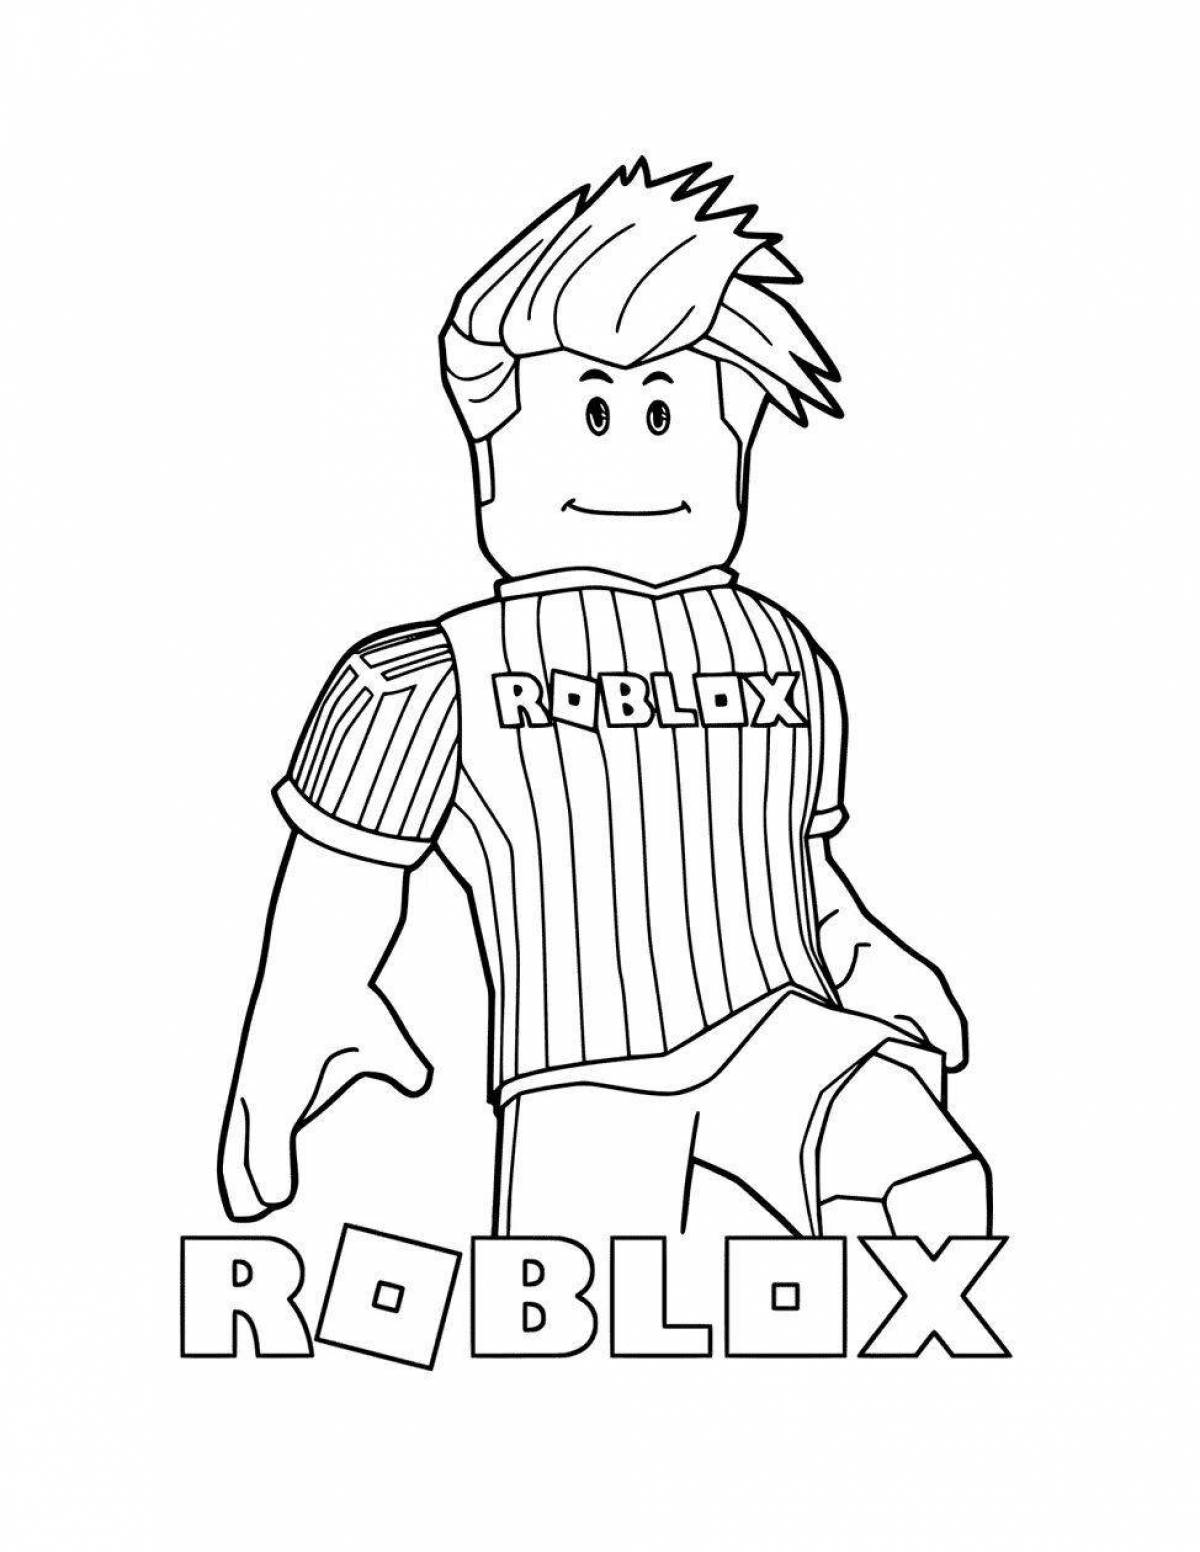 With roblox #8